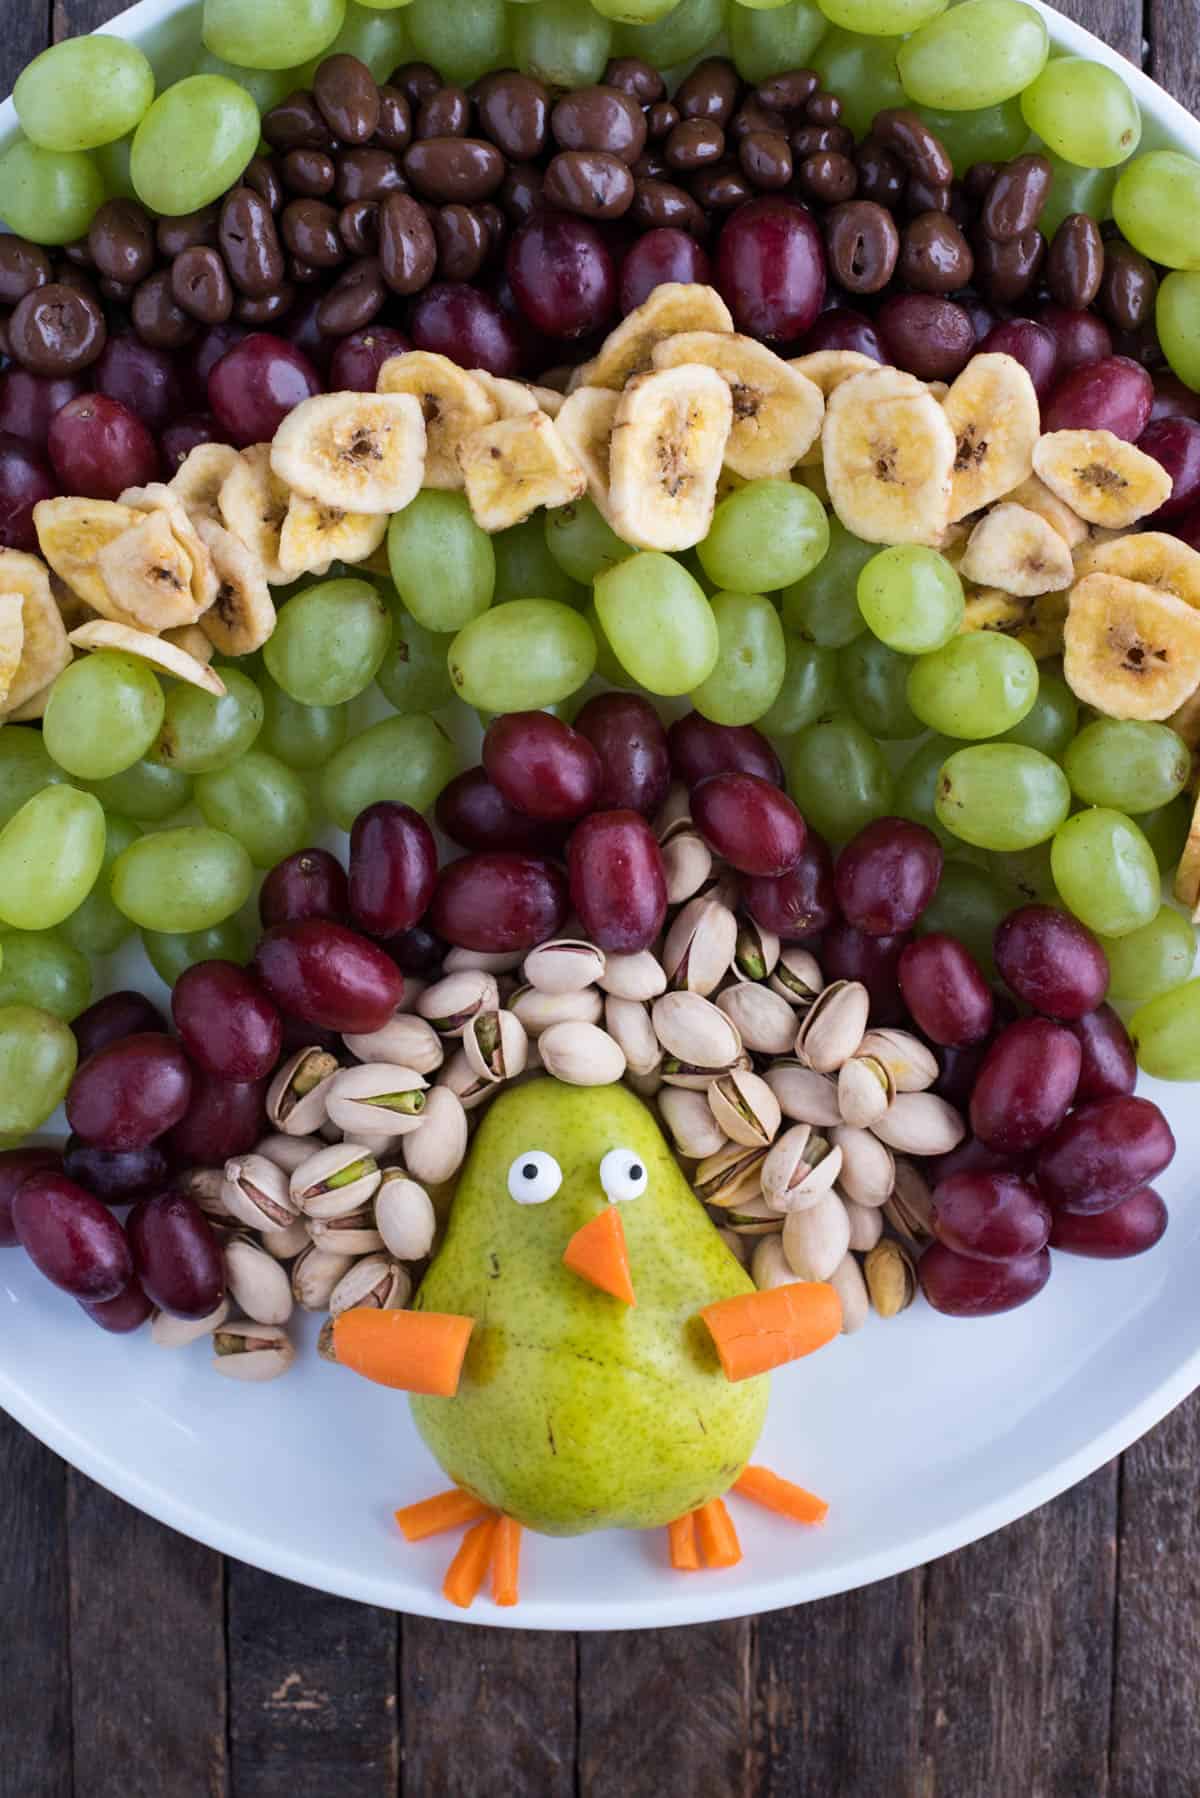 turkey shaped fruit tray with pistachios, grapes, banana chips, and pear and carrots on round white platter on wood background